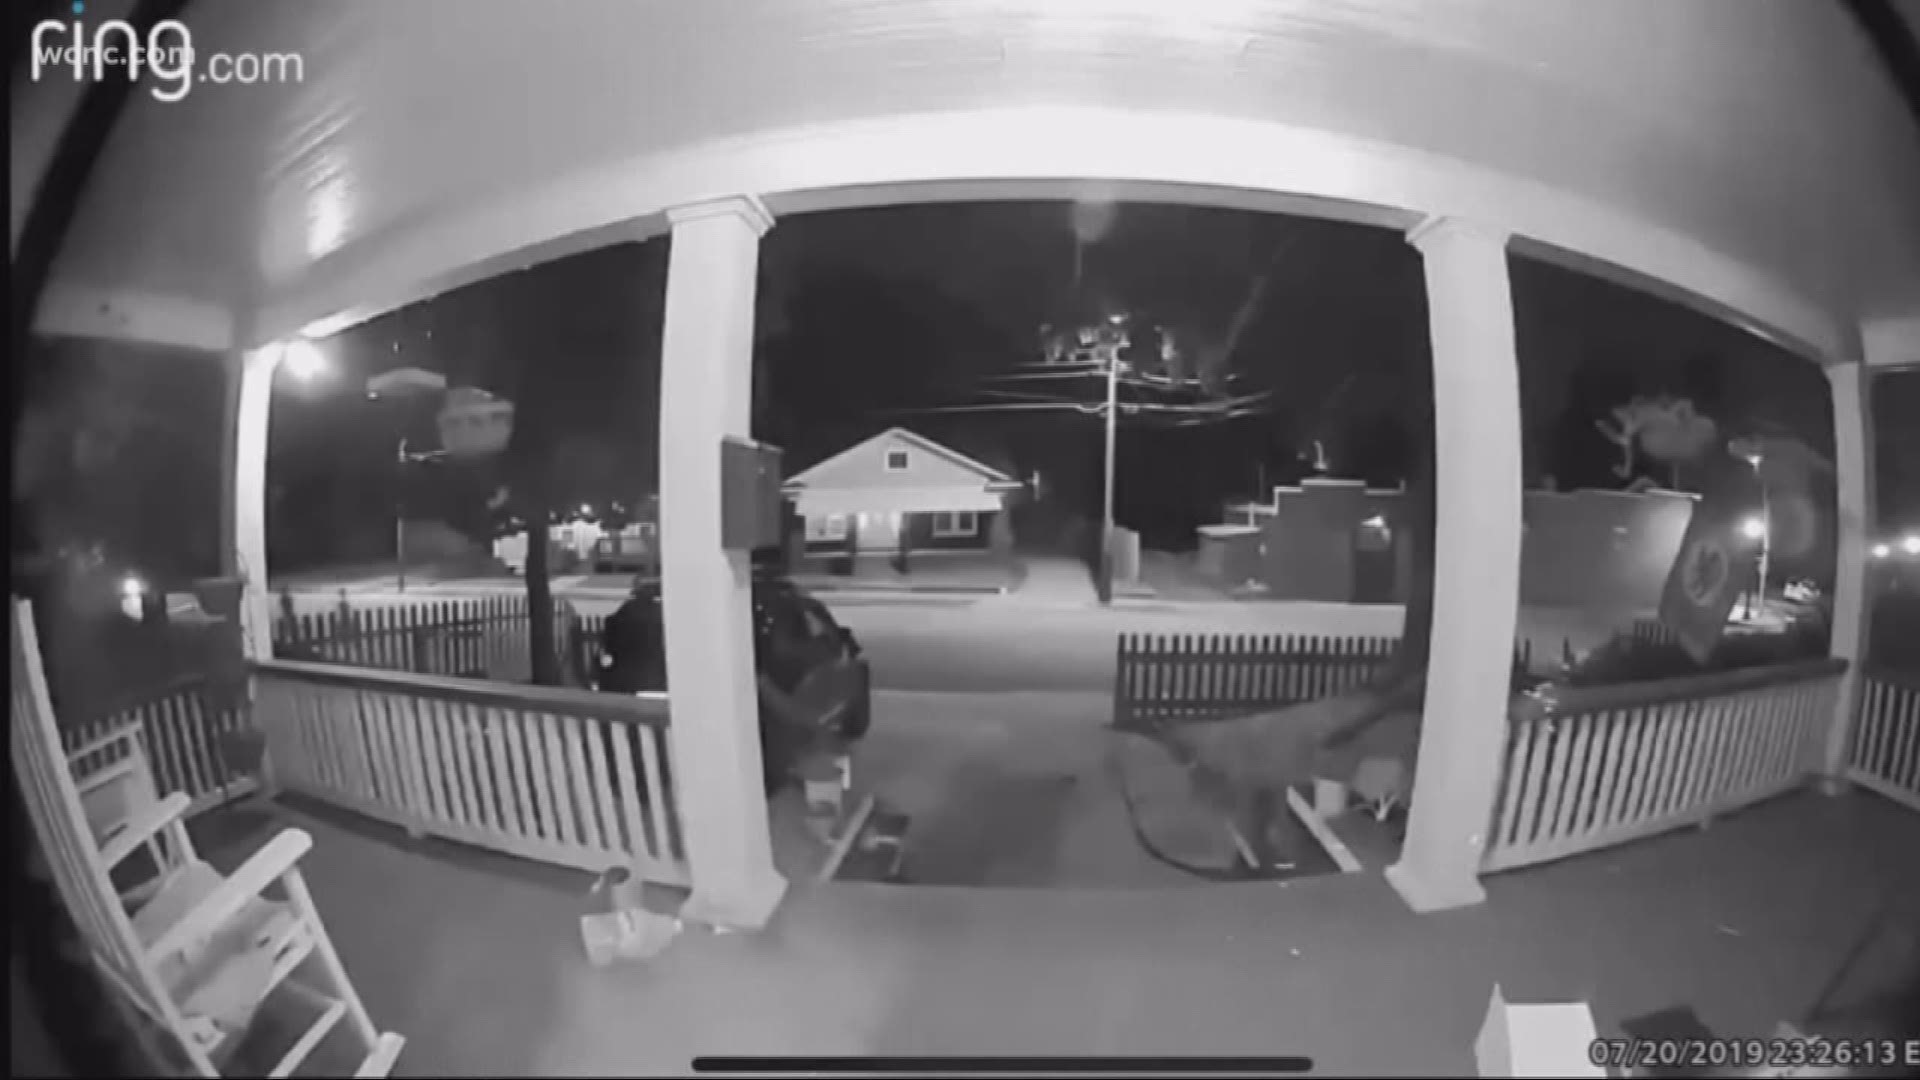 Fireworks are being set off on the front porches of local homes. Police say its a prank, but there's nothing funny about it: someone could get hurt.